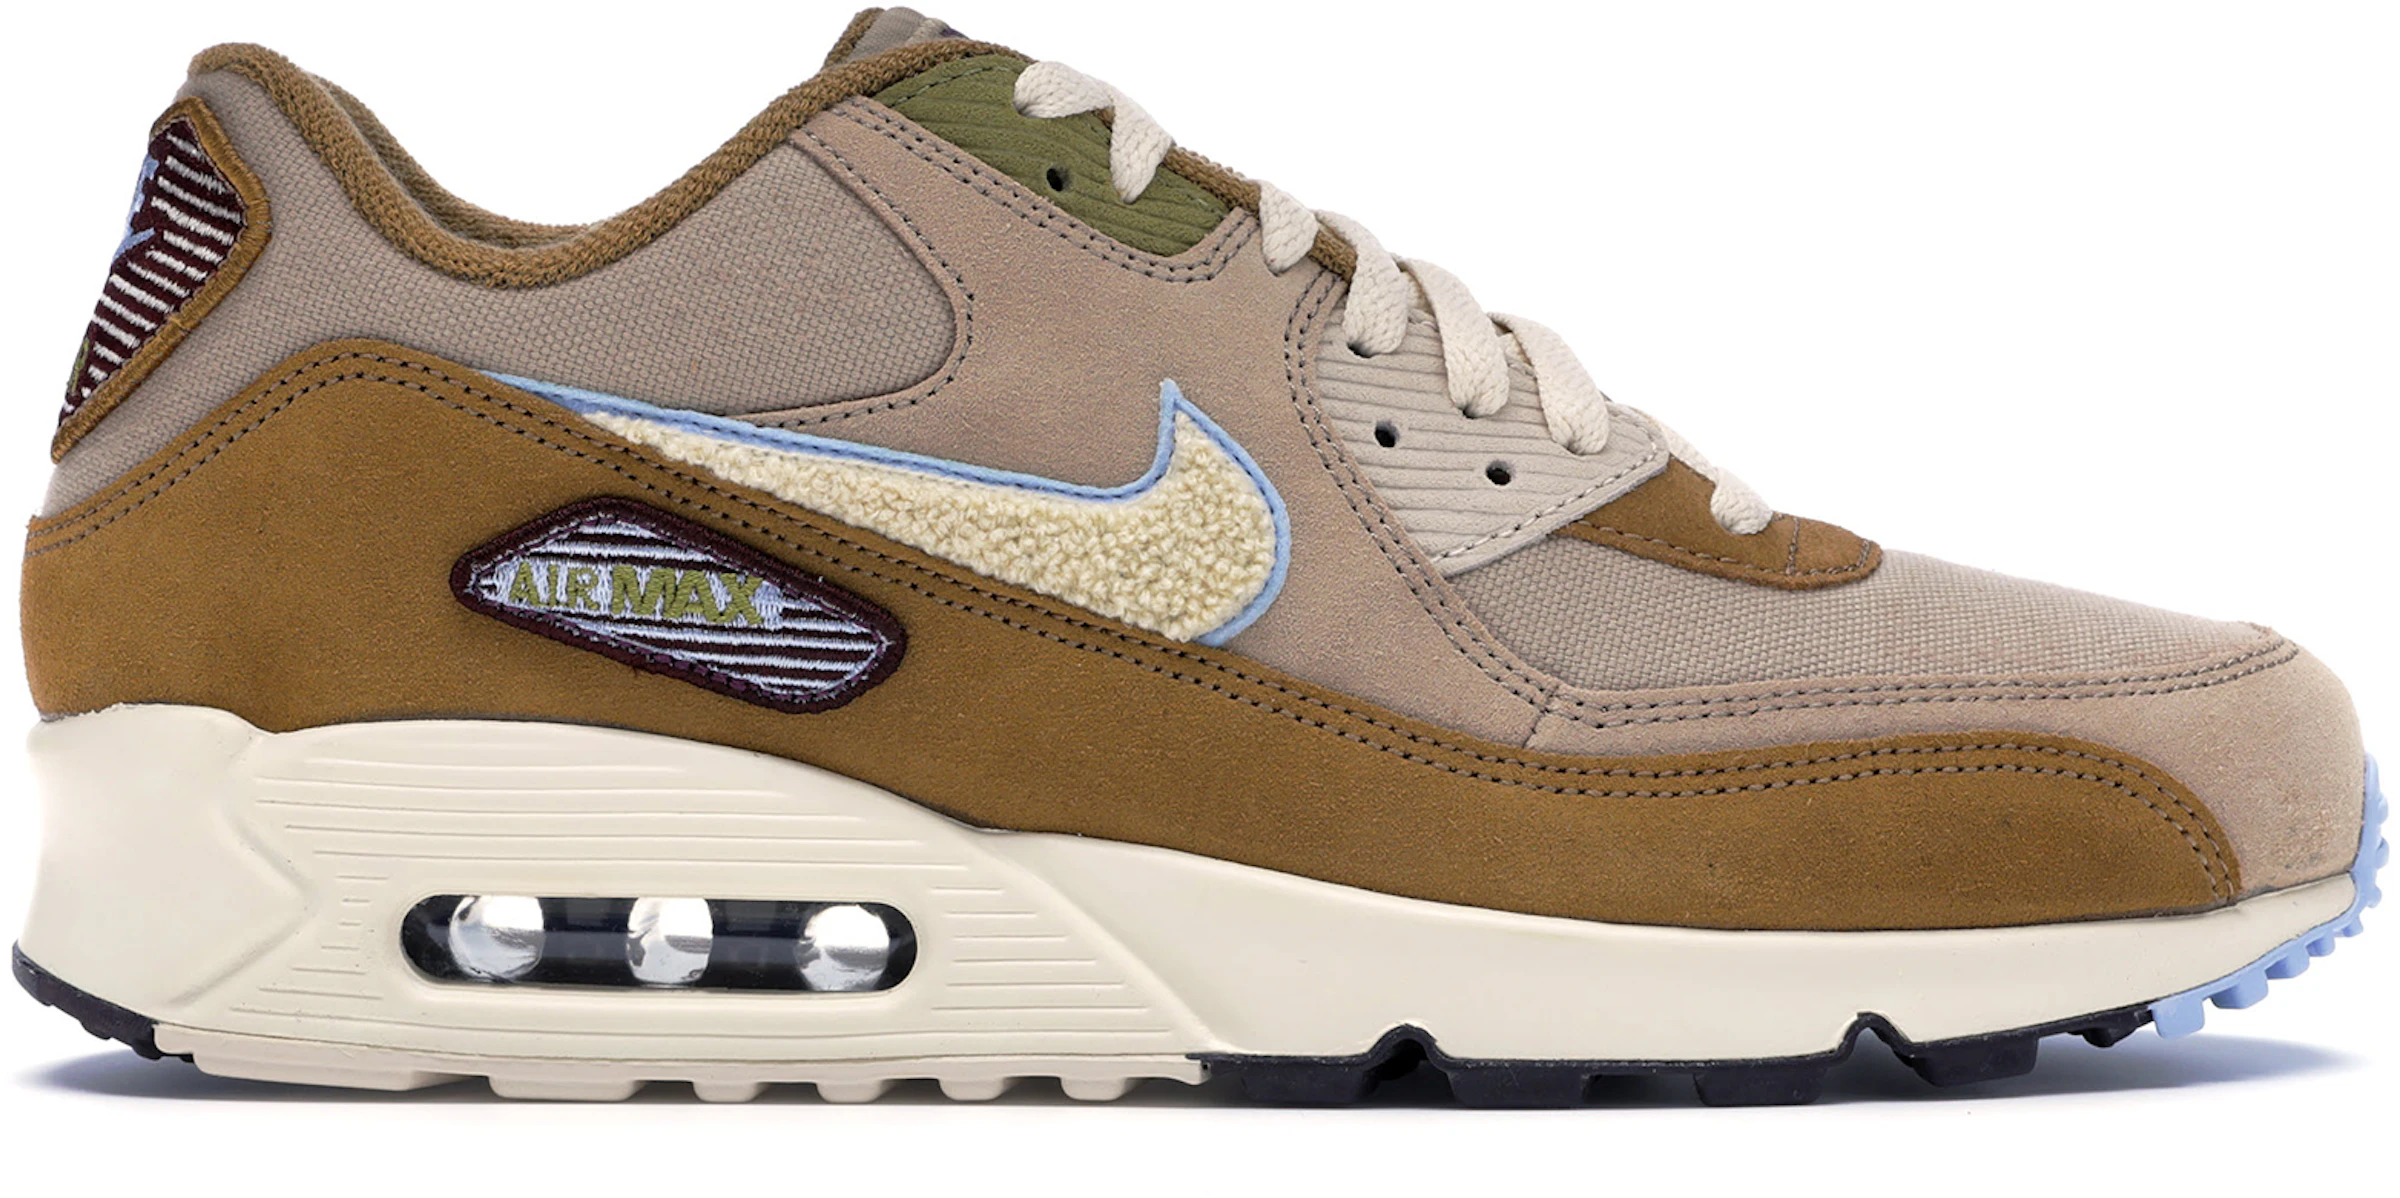 Víctor Danubio Nombre provisional Nike Air Max 90 Varsity Pack Muted Bronze - 858954-200 - MX